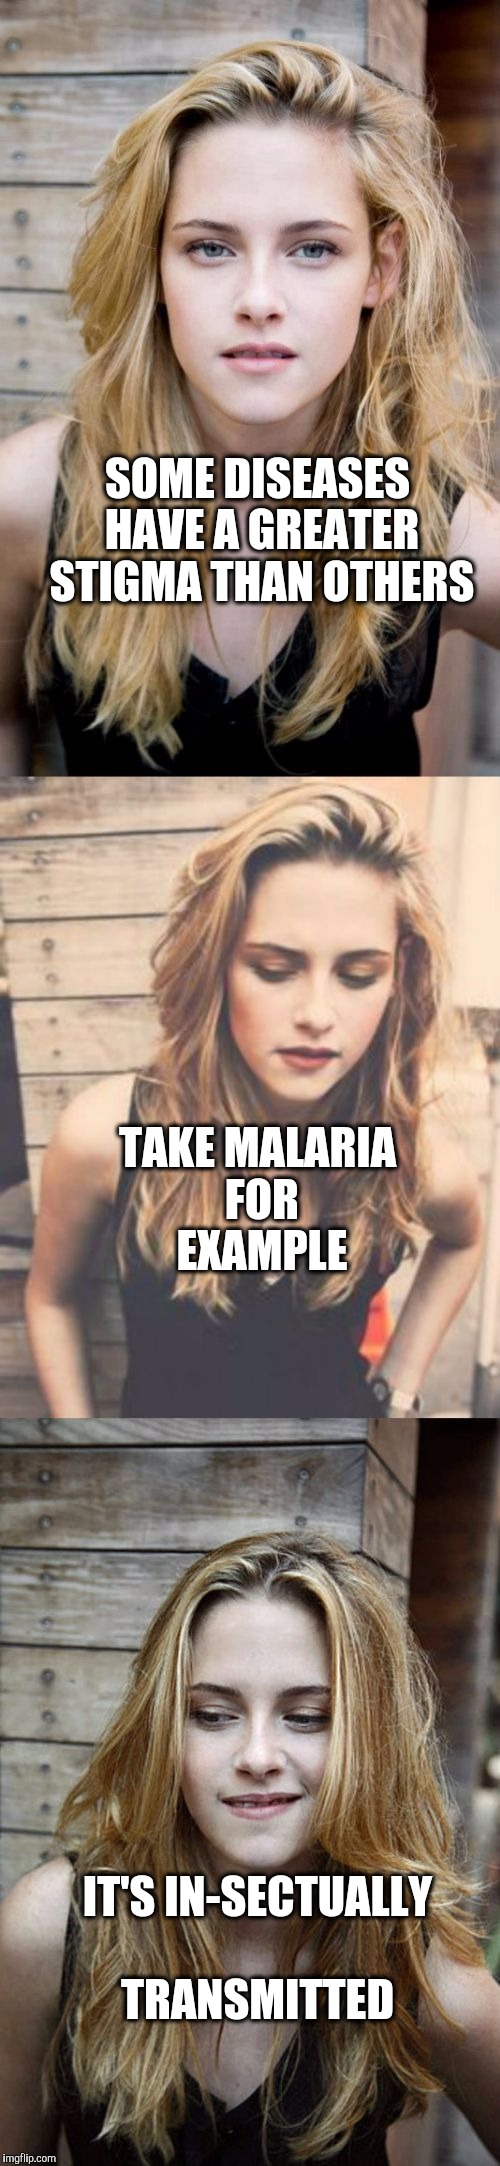 Bad pun Kristen Stewart 2 | SOME DISEASES HAVE A GREATER STIGMA THAN OTHERS; TAKE MALARIA FOR EXAMPLE; IT'S IN-SECTUALLY TRANSMITTED | image tagged in bad pun kristen stewart 2,bad pun | made w/ Imgflip meme maker